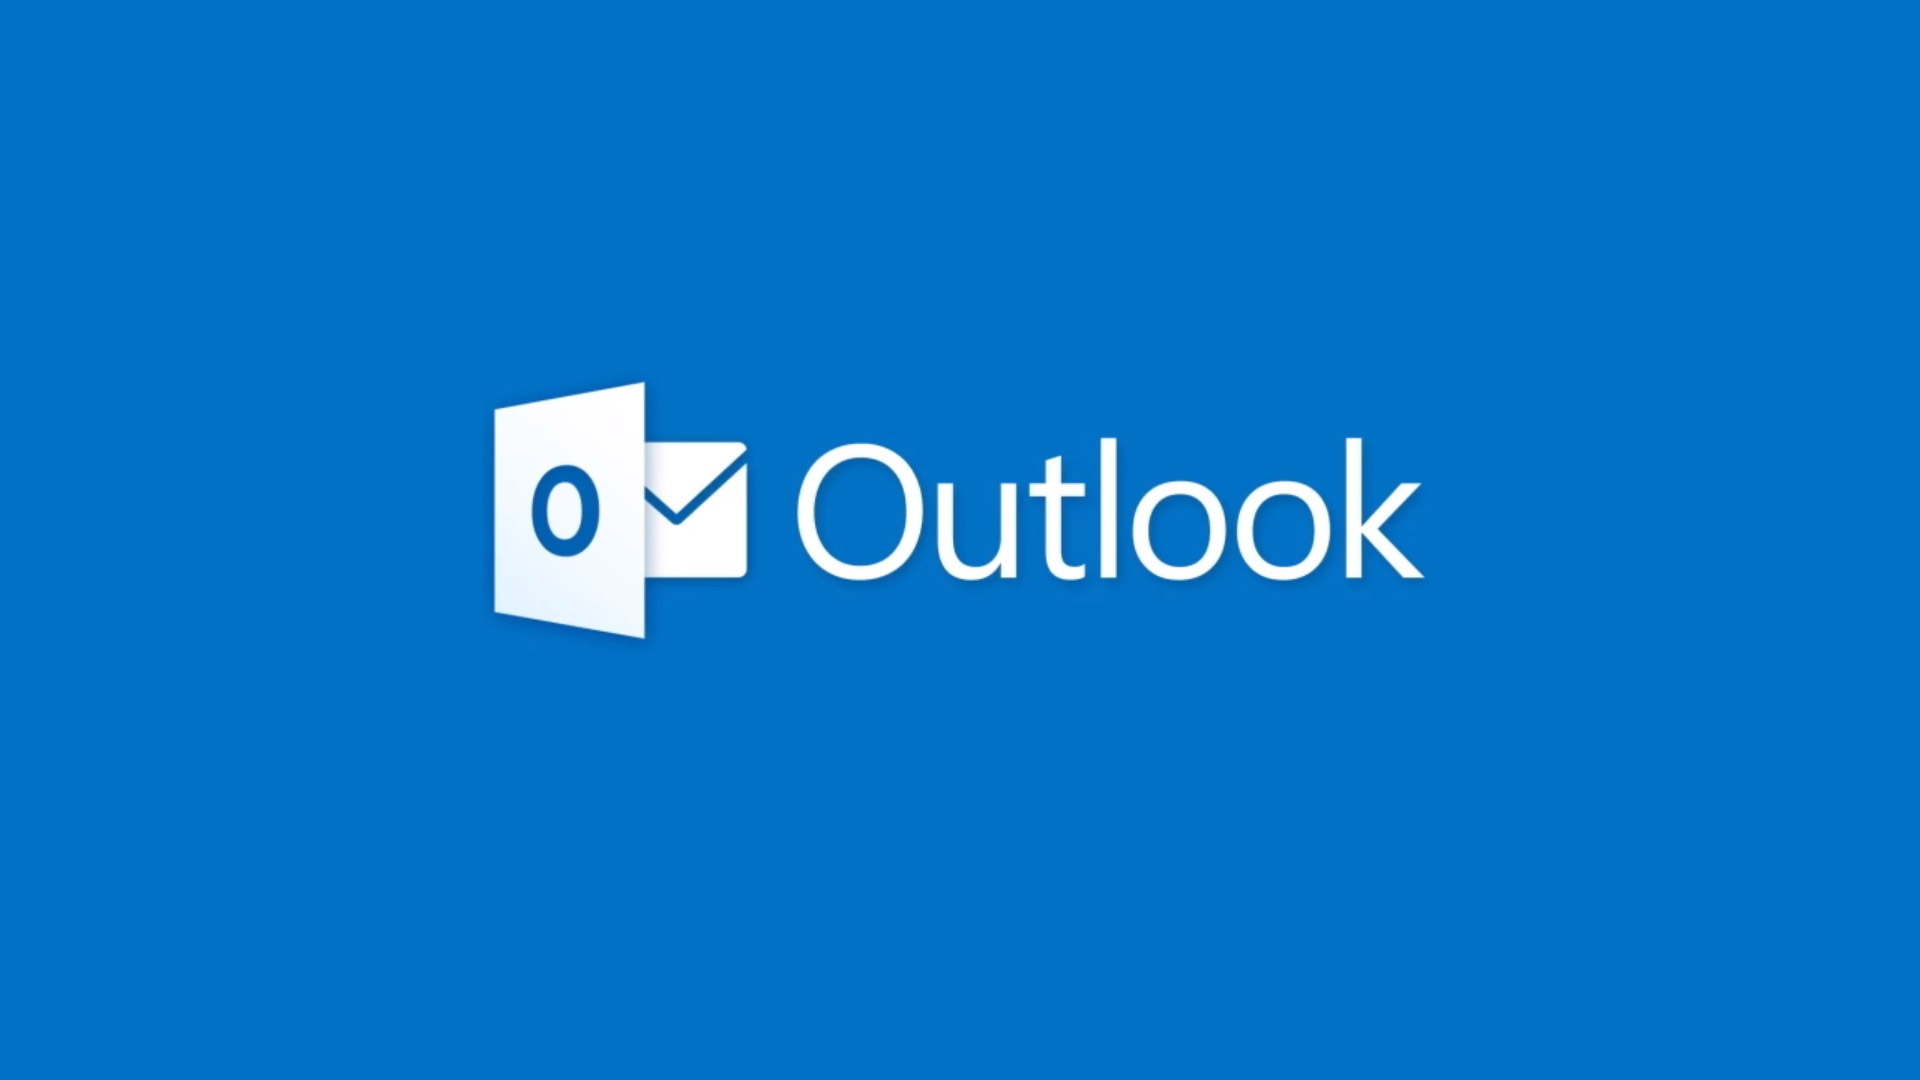 Microsoft Outlook update will address one of the most common office frustrations | TechRadar